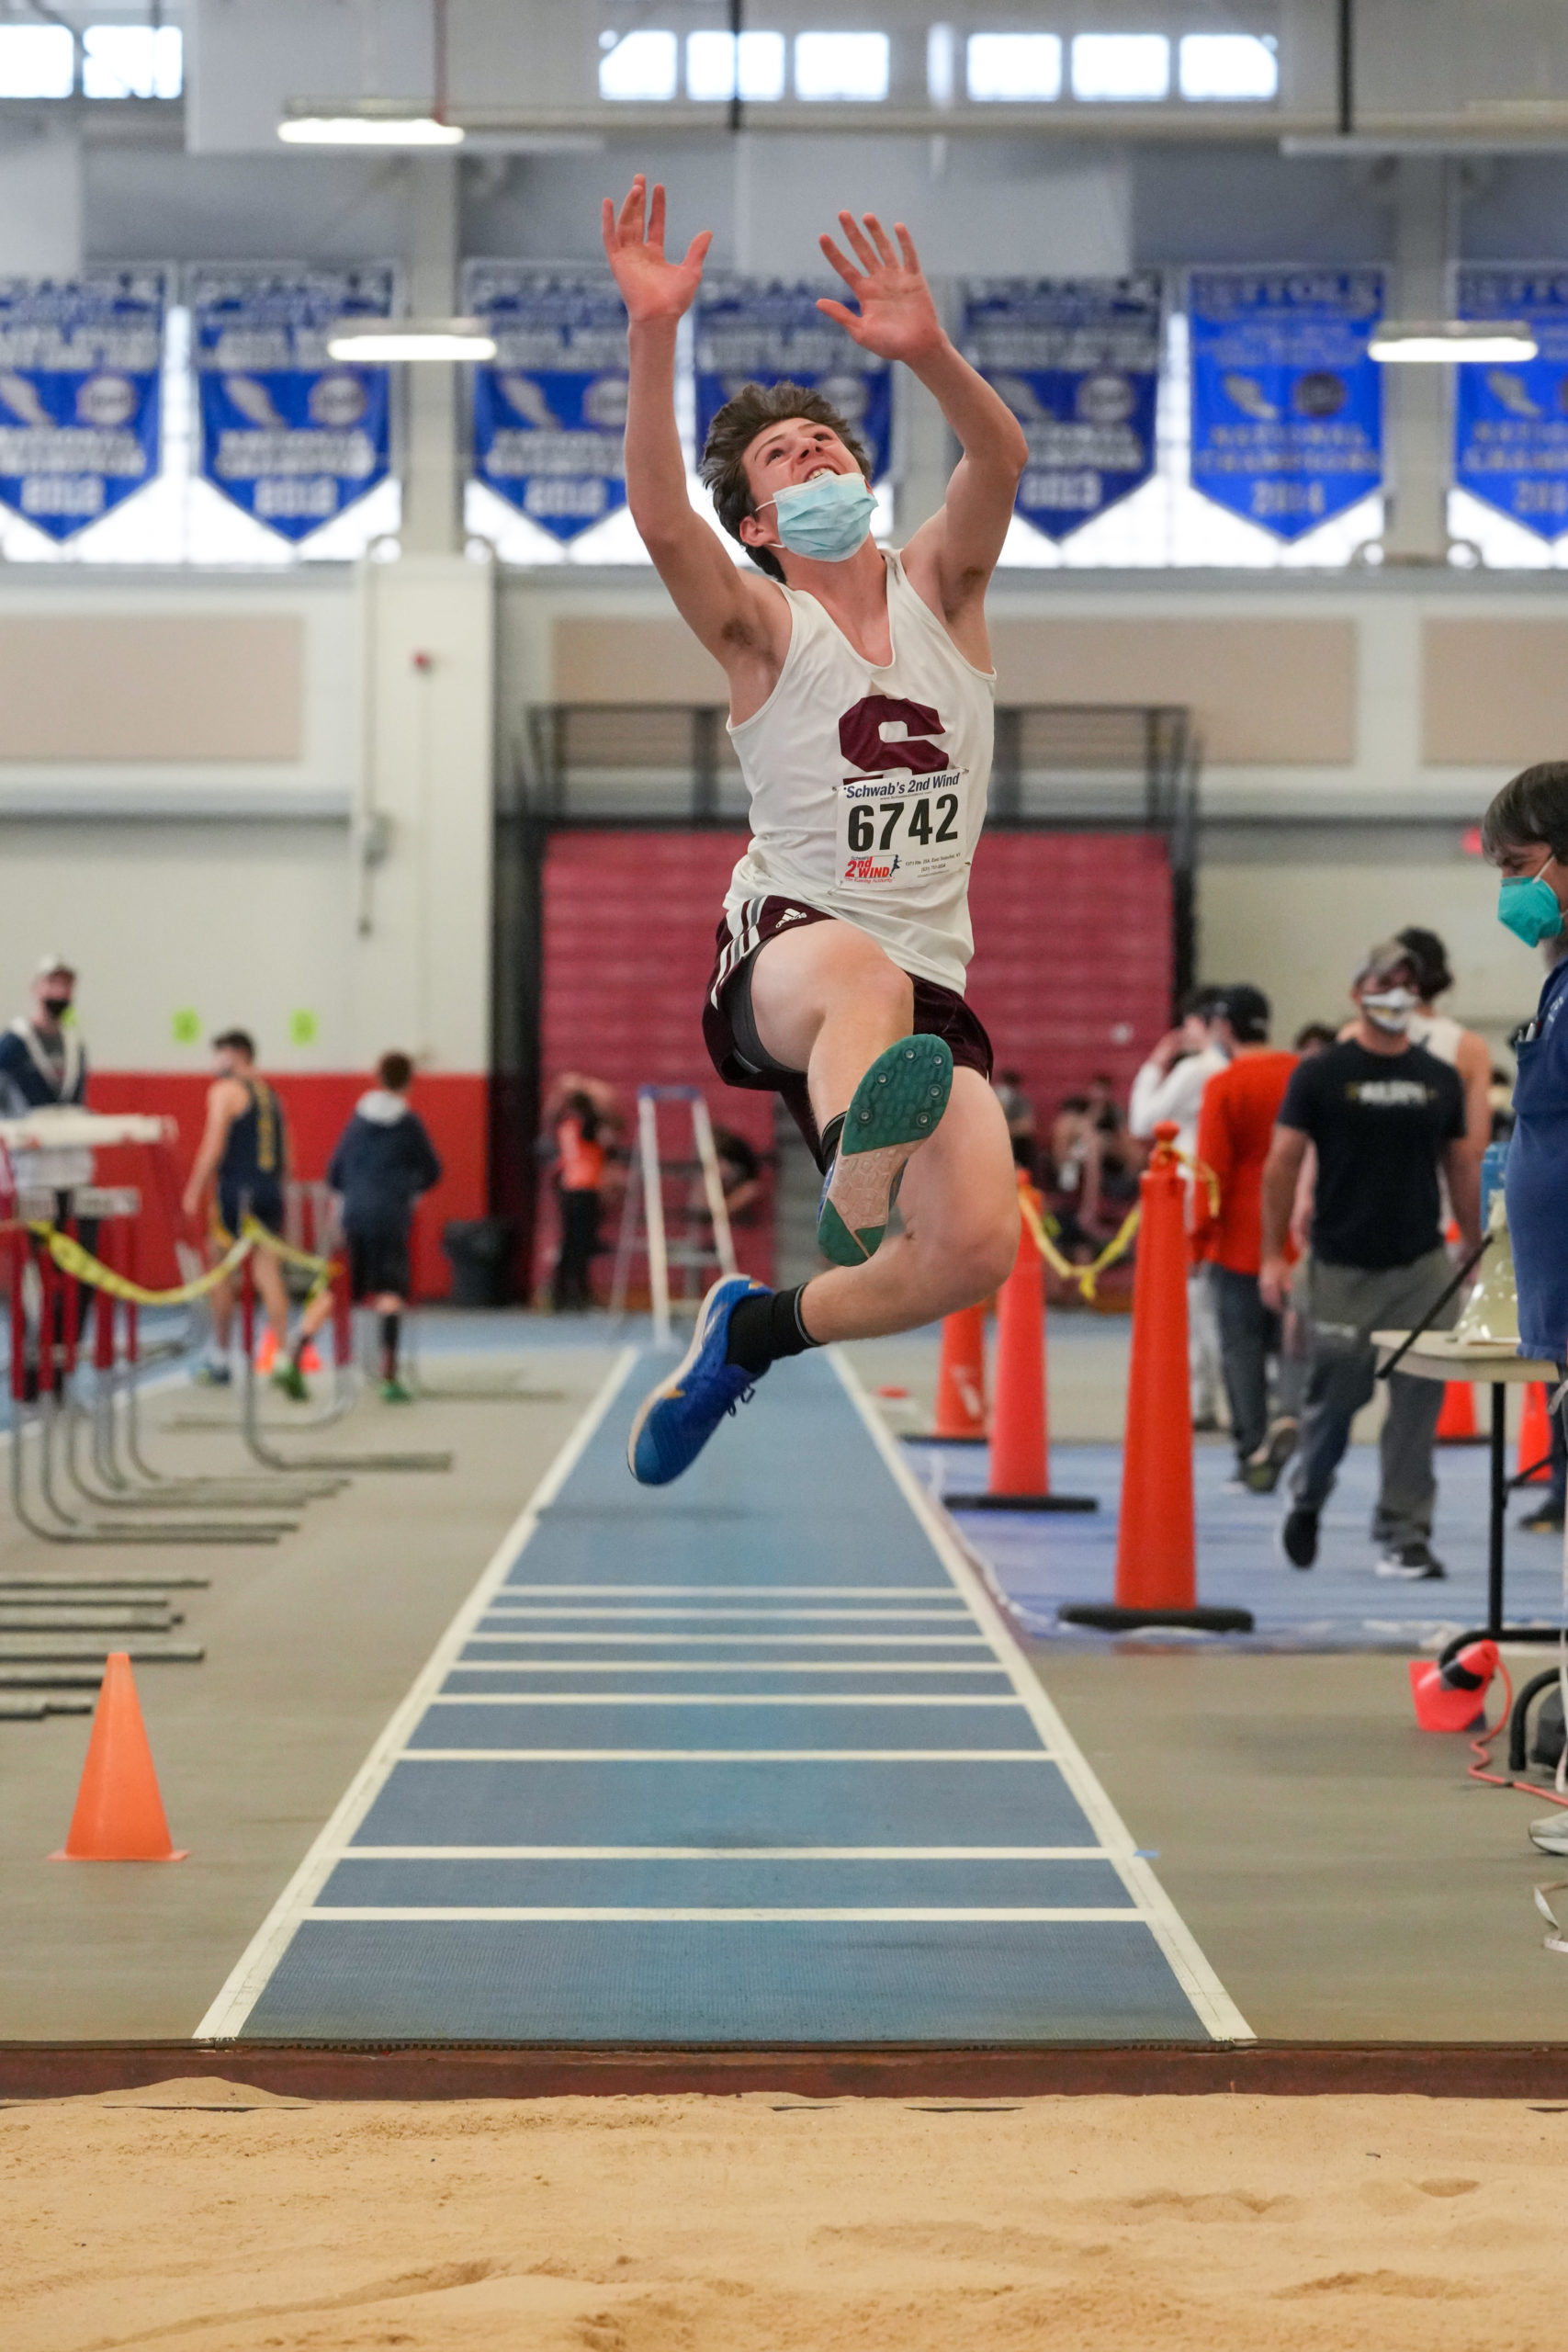 Mariner Thayer Schwartz making his leap in the long jump.